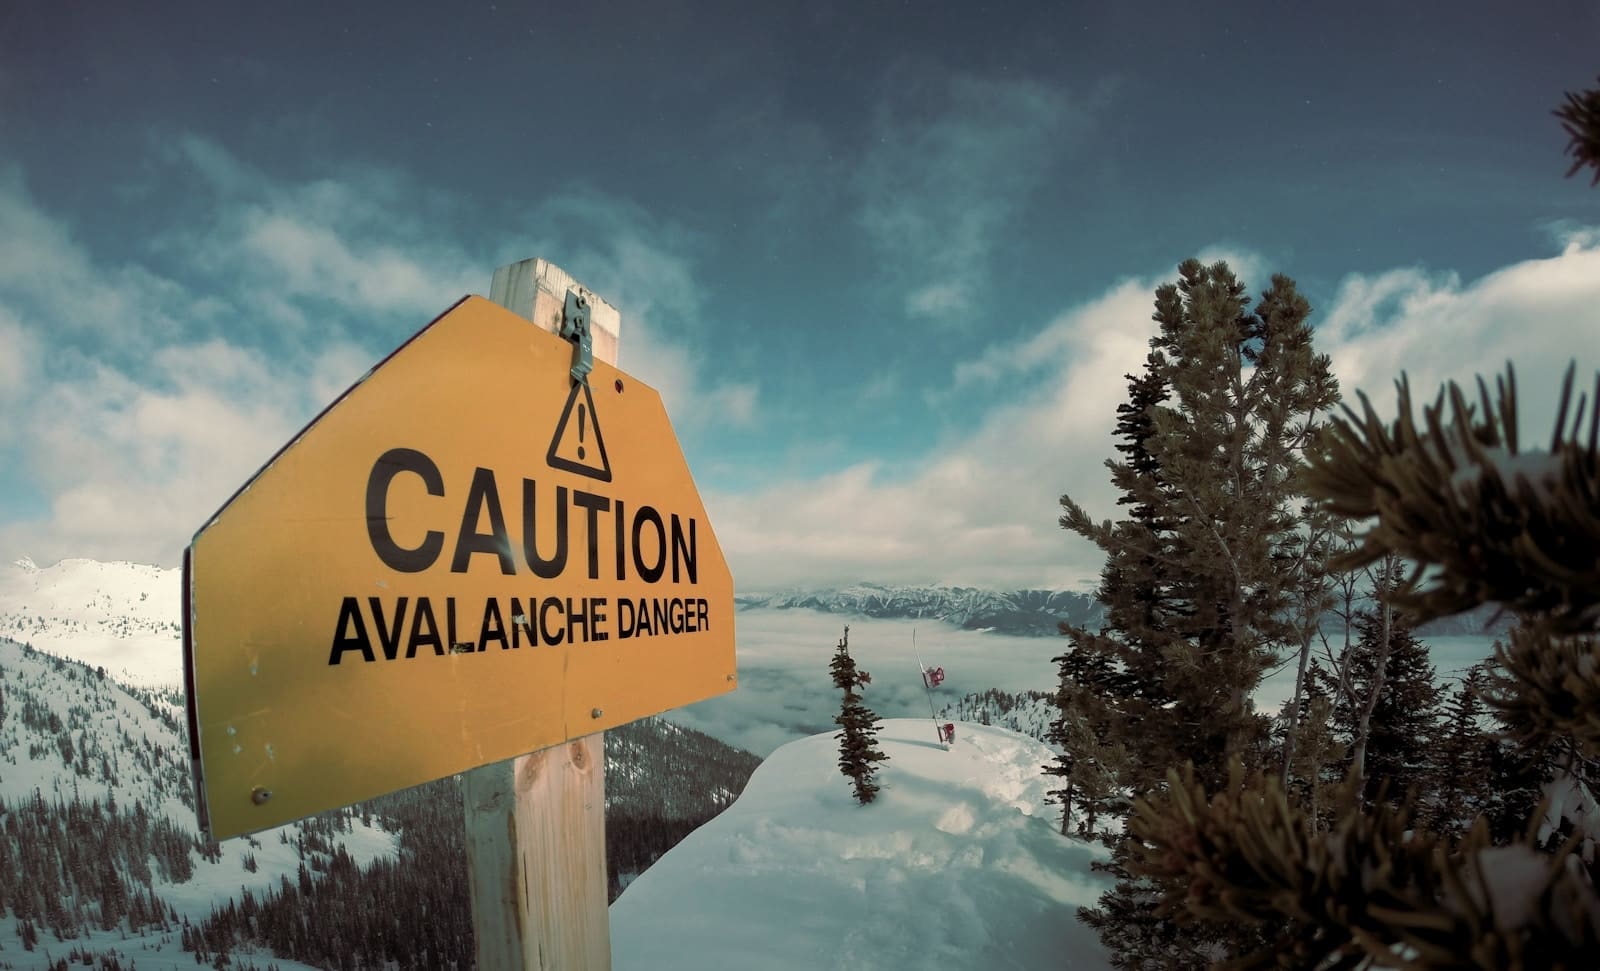 Safety Tips for Traveling in Avalanche-Prone Areas